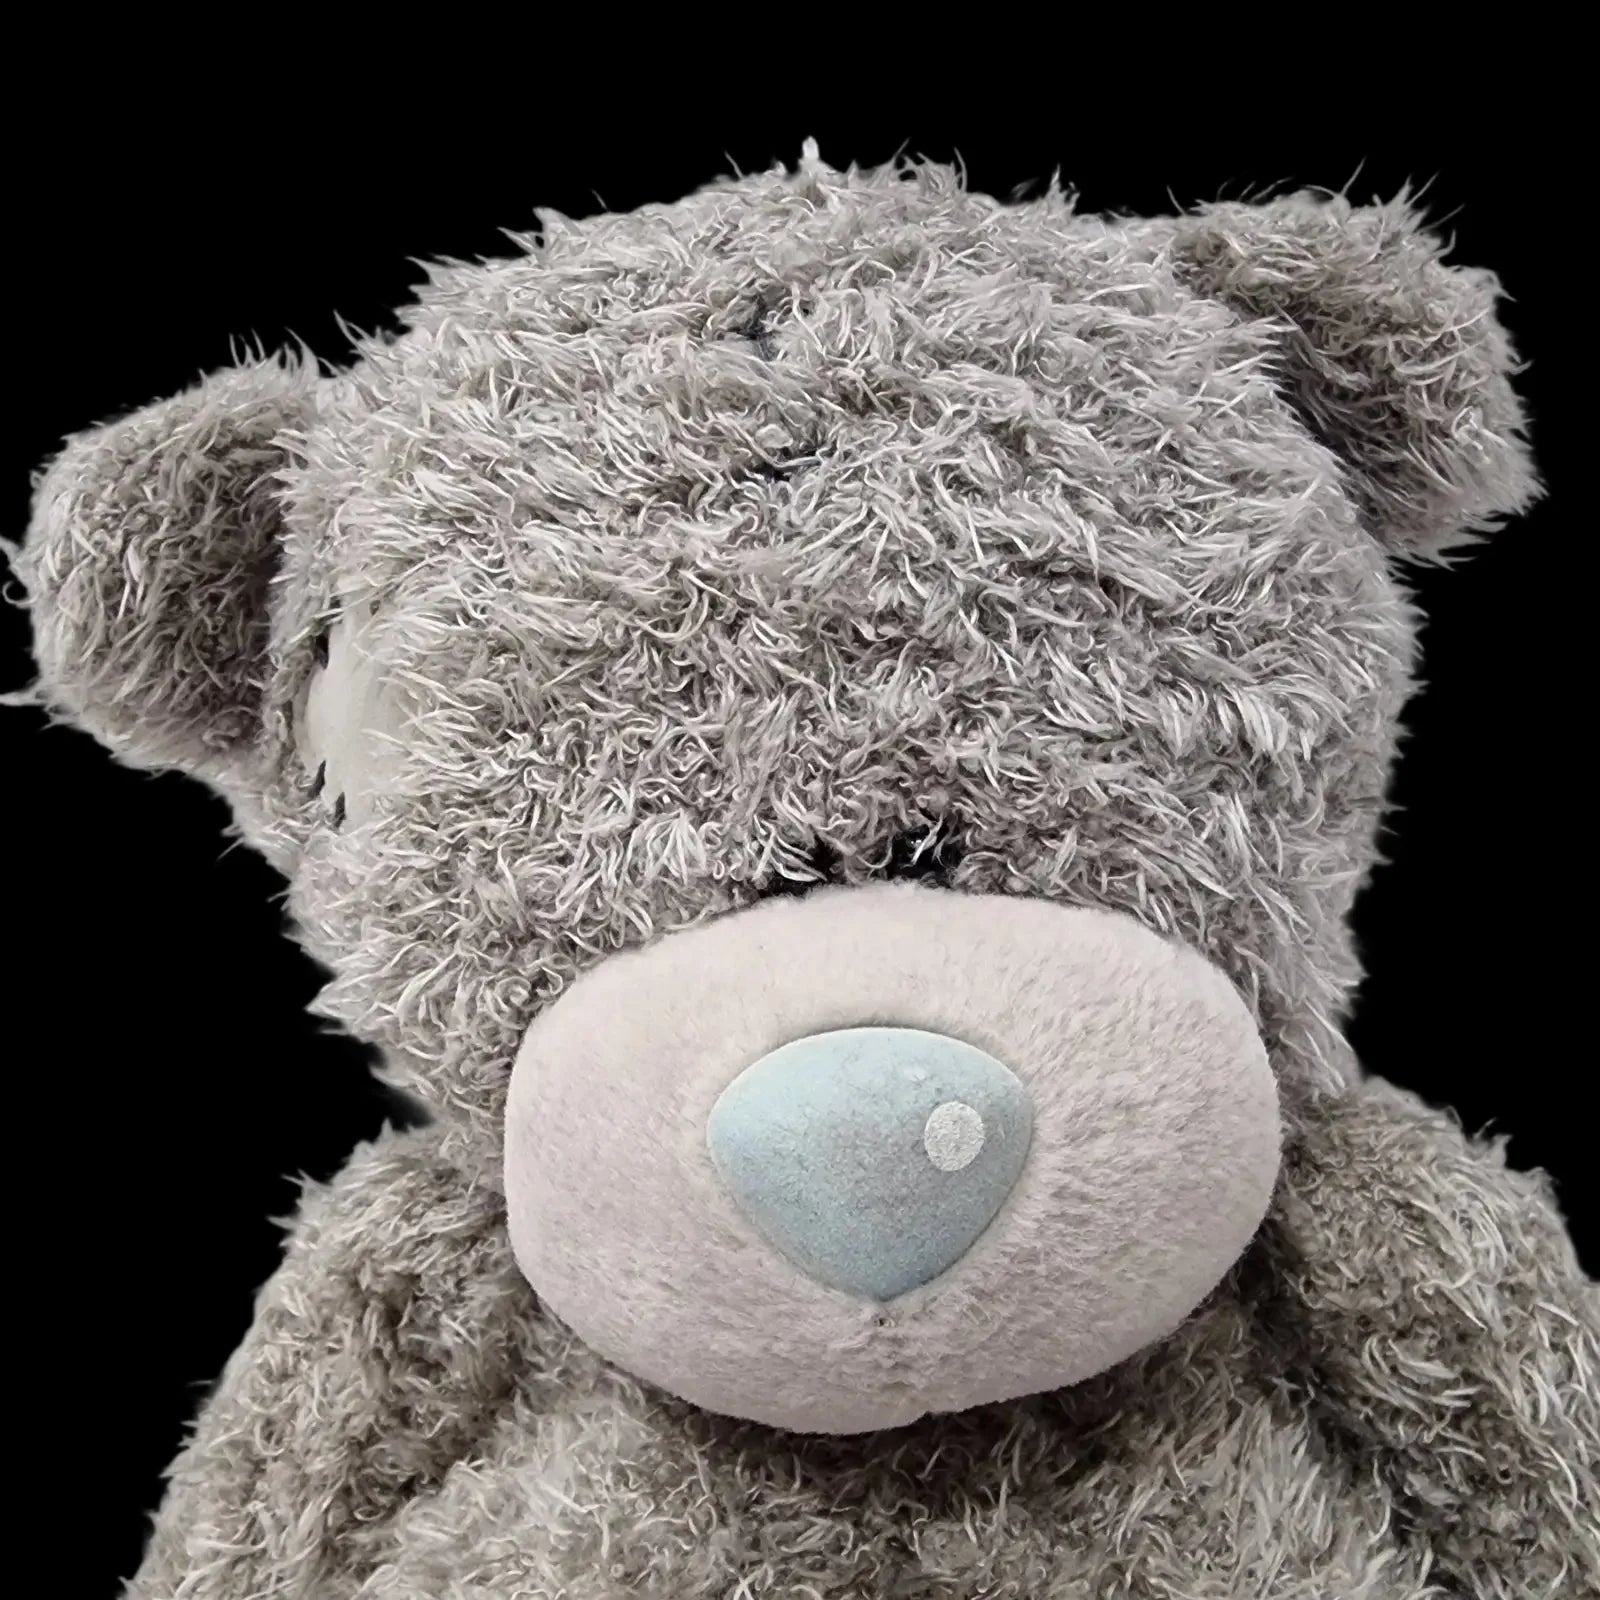 Me To You Soft Cuddly Toy Grey Plush Teddy Bears Small - 2